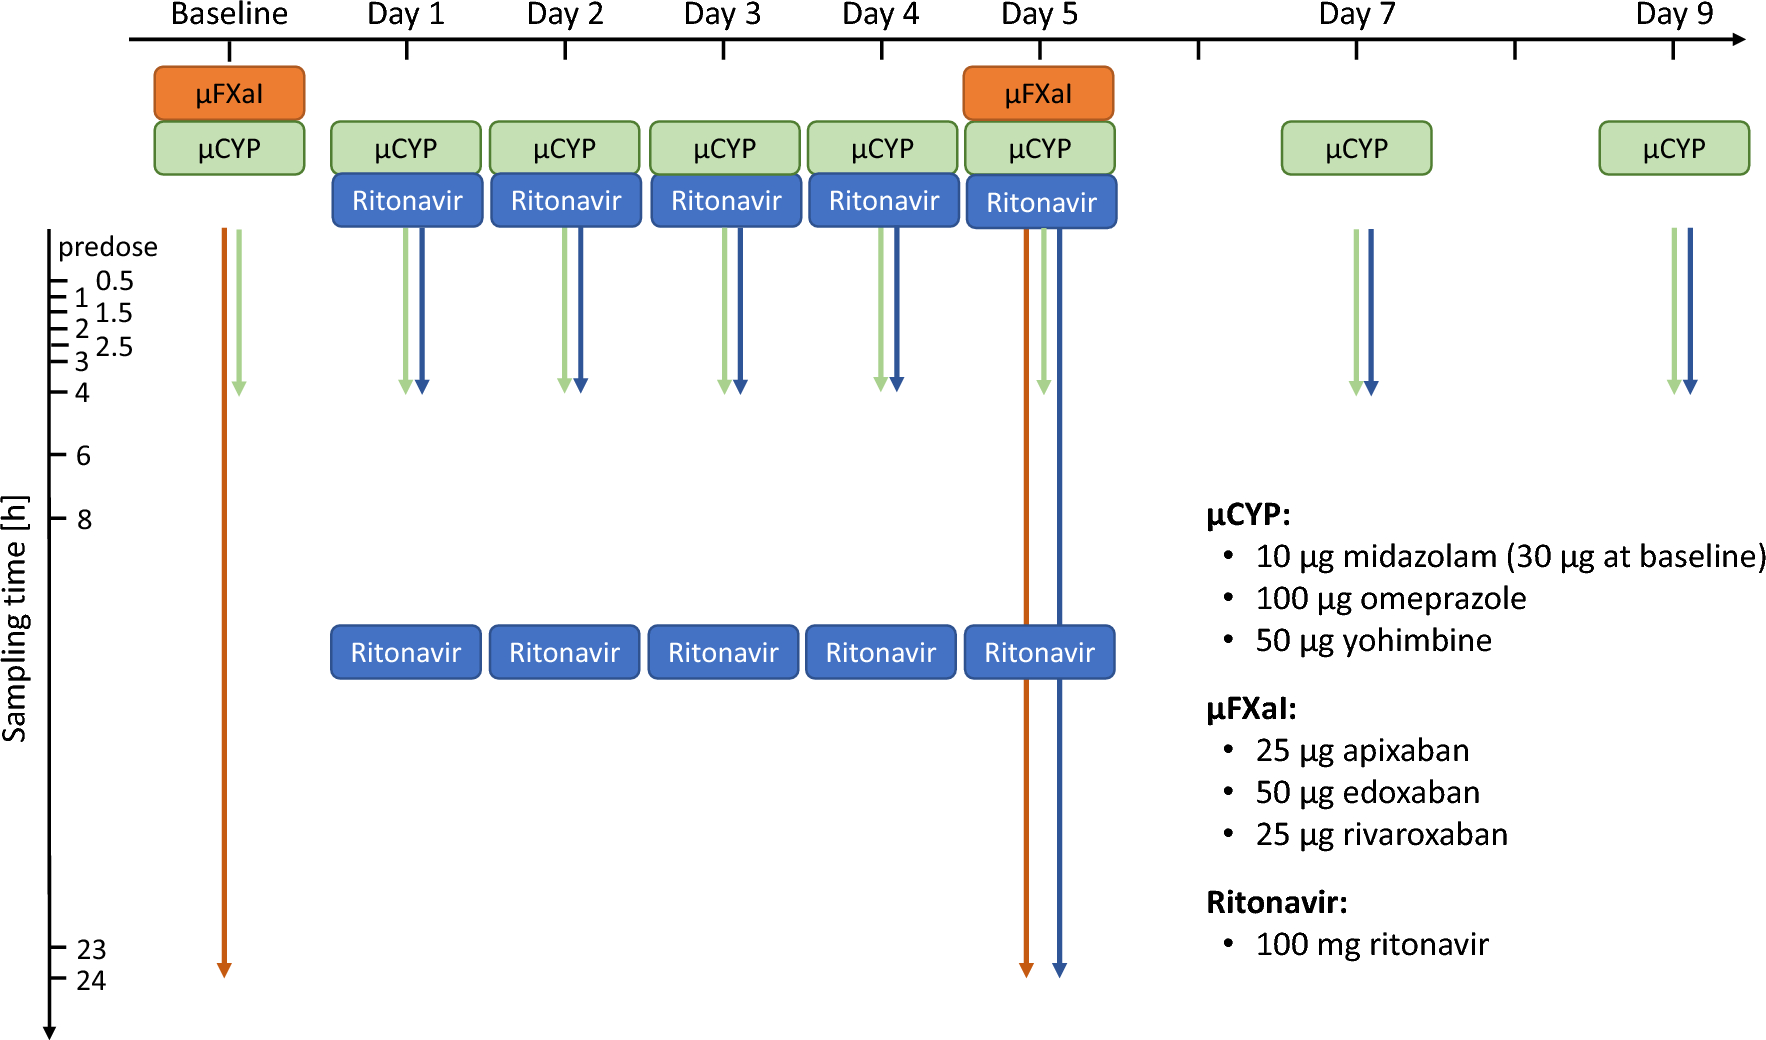 Time Course of the Interaction Between Oral Short-Term Ritonavir Therapy with Three Factor Xa Inhibitors and the Activity of CYP2D6, CYP2C19, and CYP3A4 in Healthy Volunteers